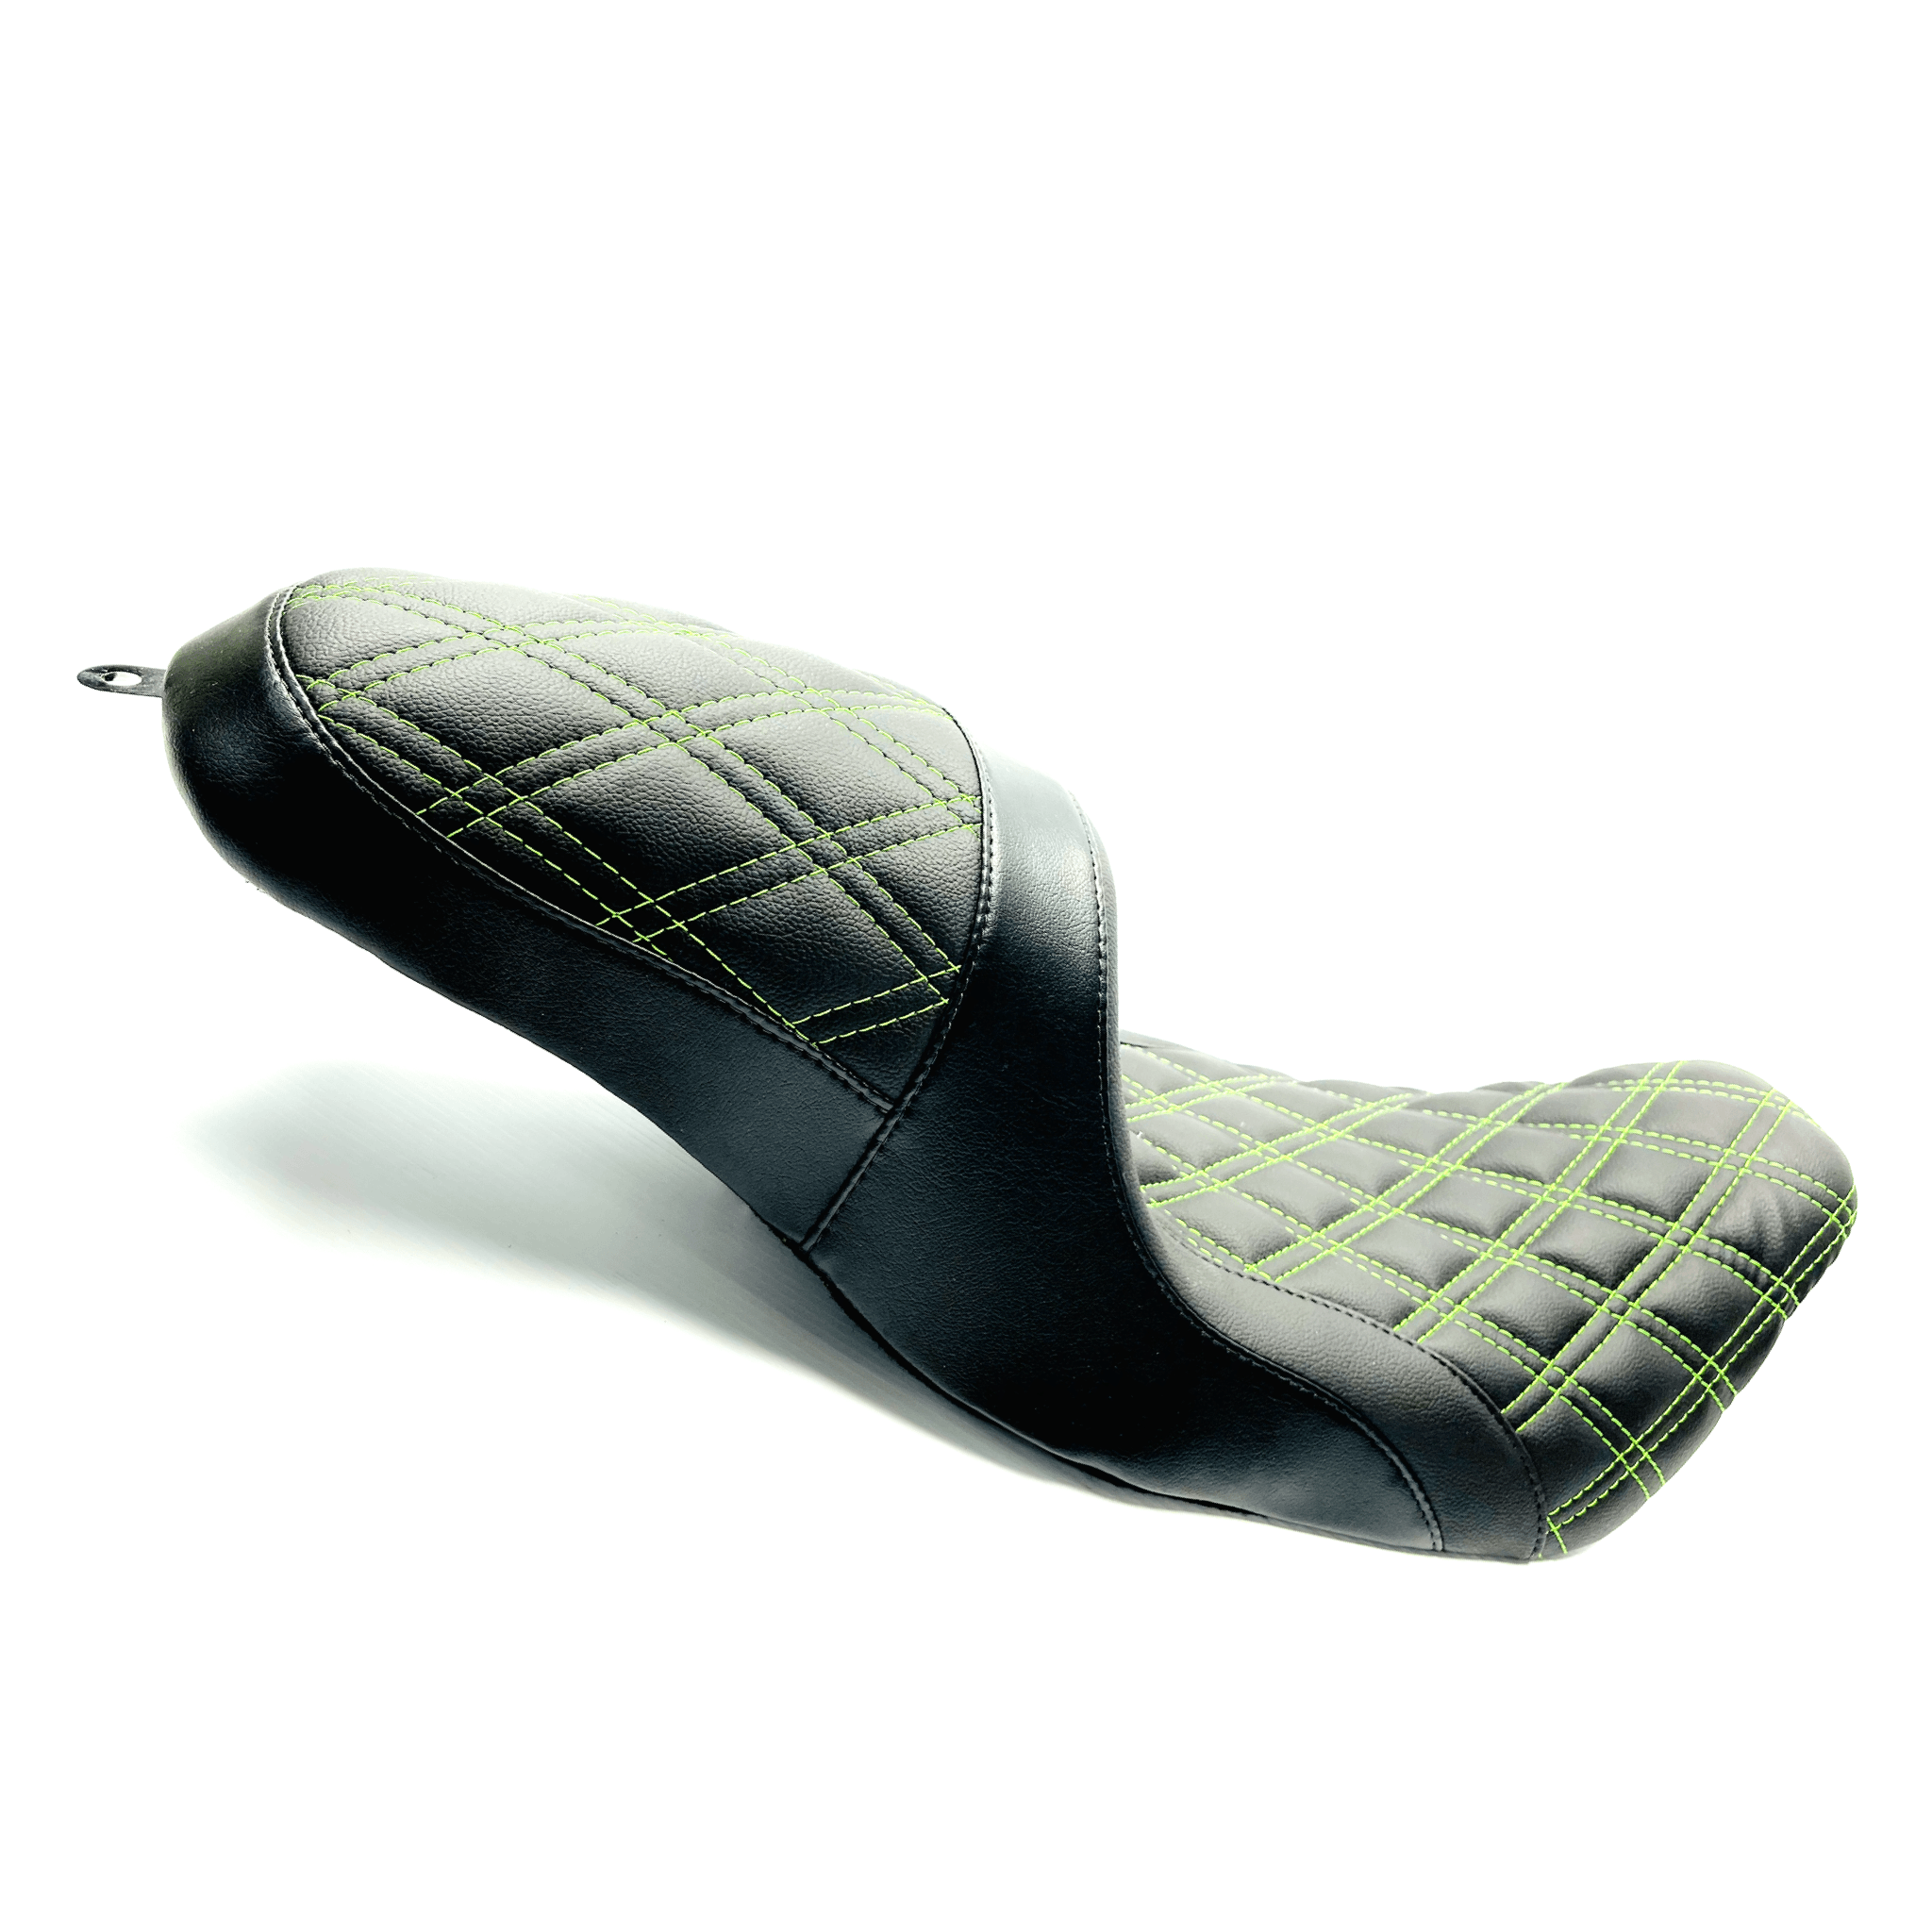 The FASTBACK 2Up Touring Seat 08-21 Green Double Diamond - CMC Motorsports